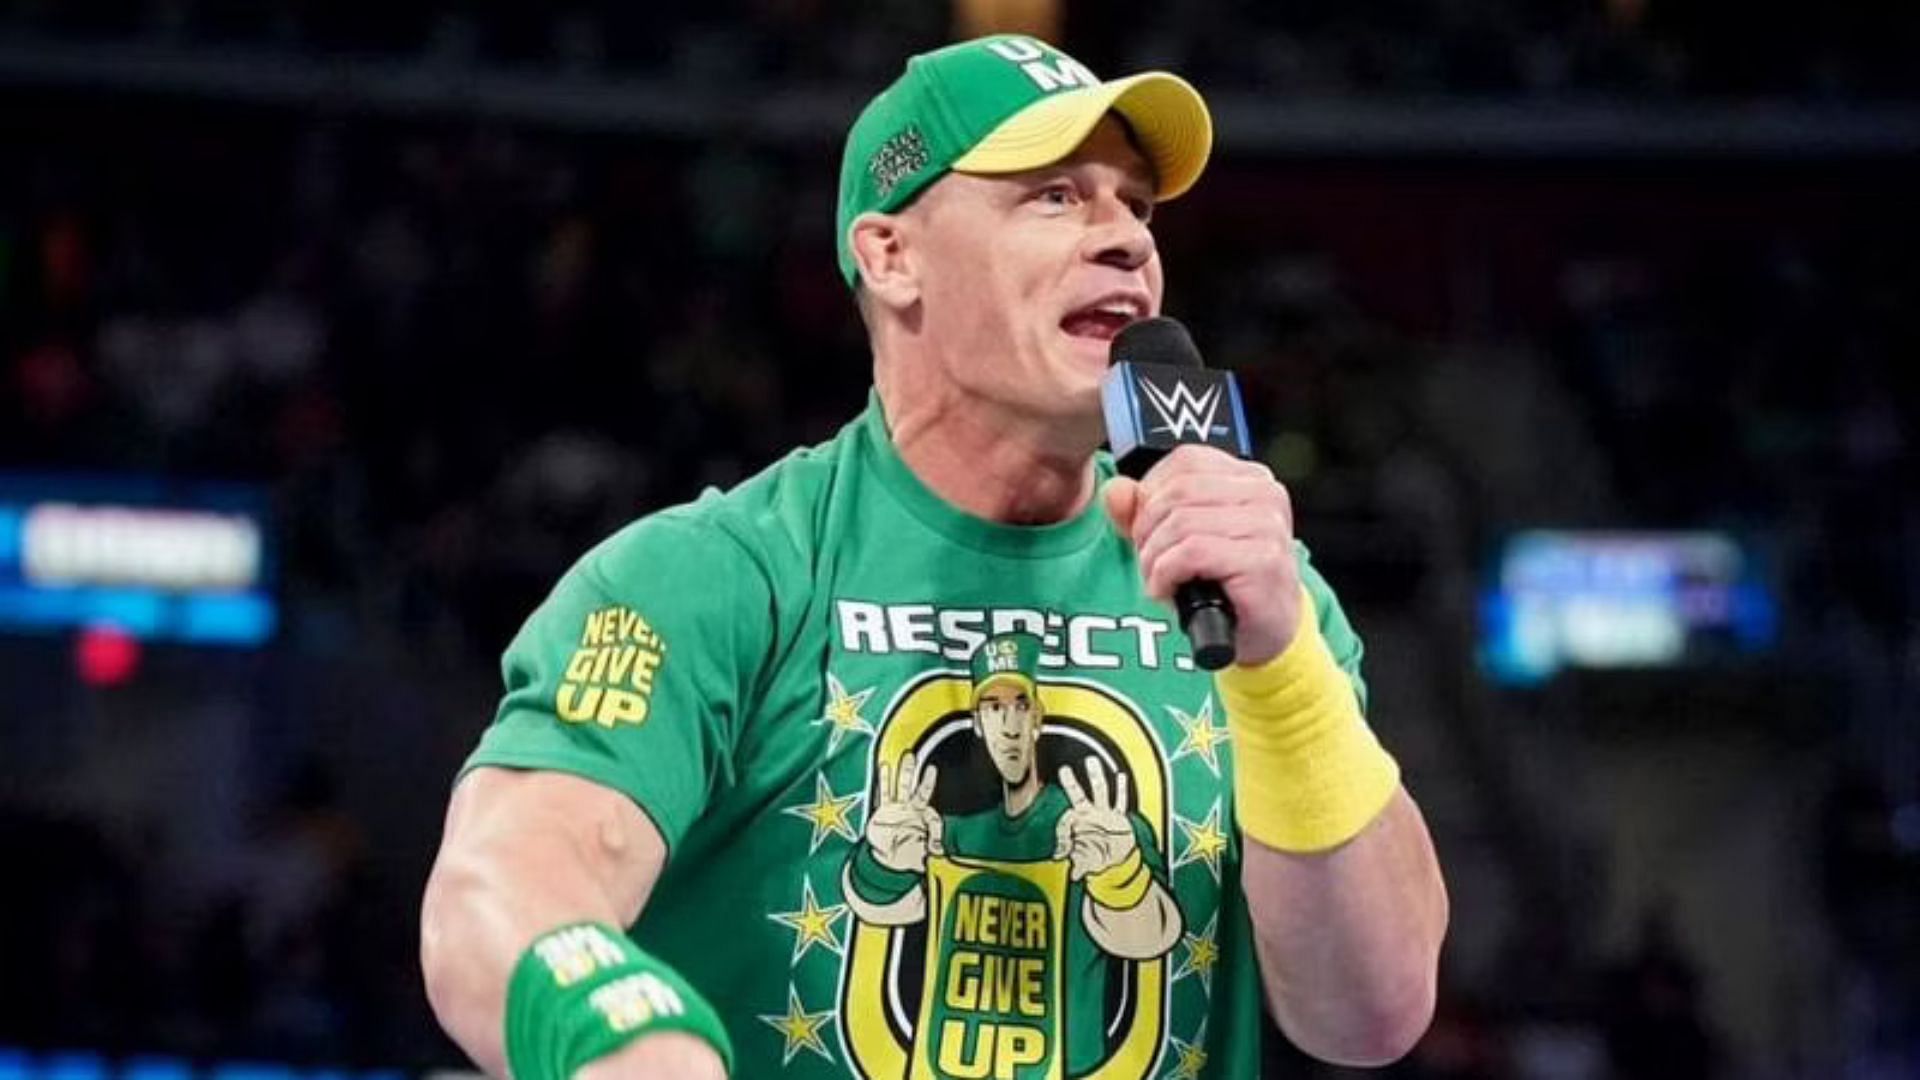 john cena never give up quotes